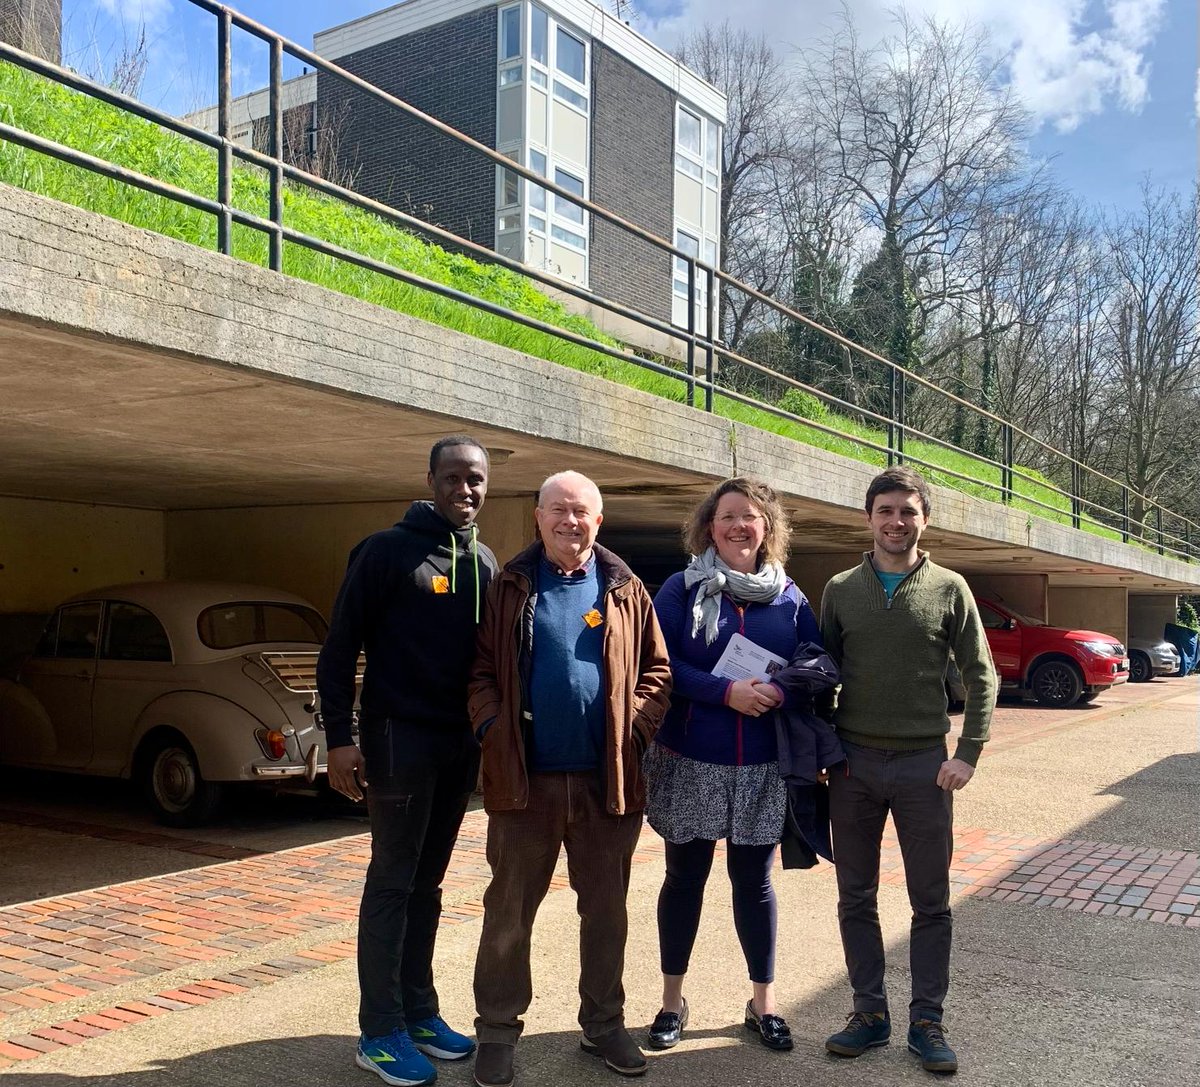 Our team talking to residents on Spedan Close this morning in #Frognal. A wonderful community so badly let down by Labour run #Camden Council.